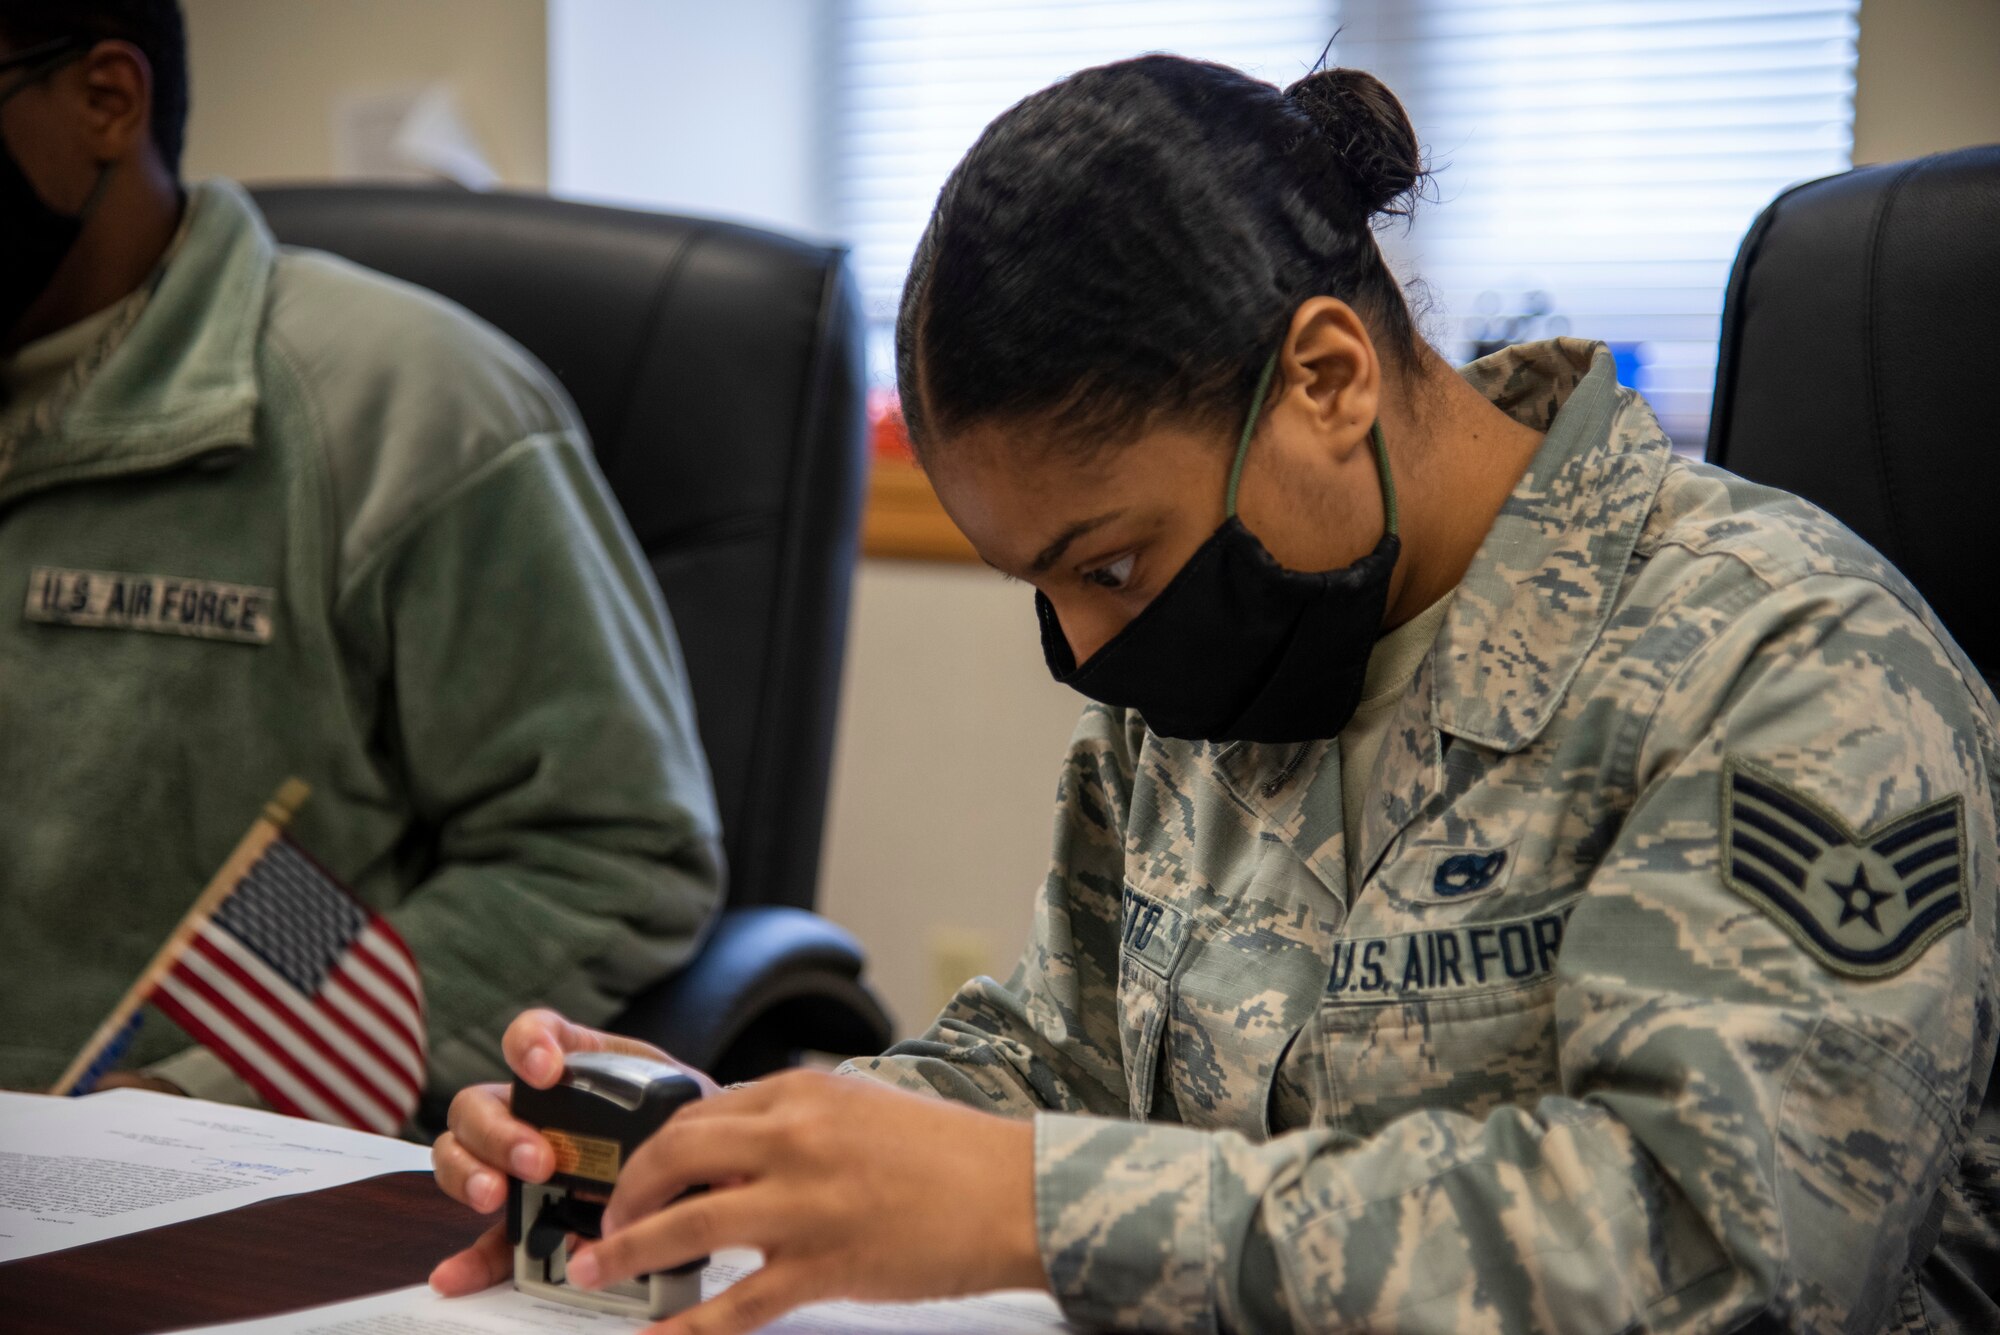 Staff Sgt. Tanea Resto, 436th Airlift Wing Legal Office NCOIC of military justice, stamps a document during an appointment May 1, 2020, at Dover Air Force Base, Delaware. Many legal office functions have shifted to teleworking; however, some appointments require in-person signatures. (U.S. Air Force photo by Airman 1st Class Jonathan Harding)